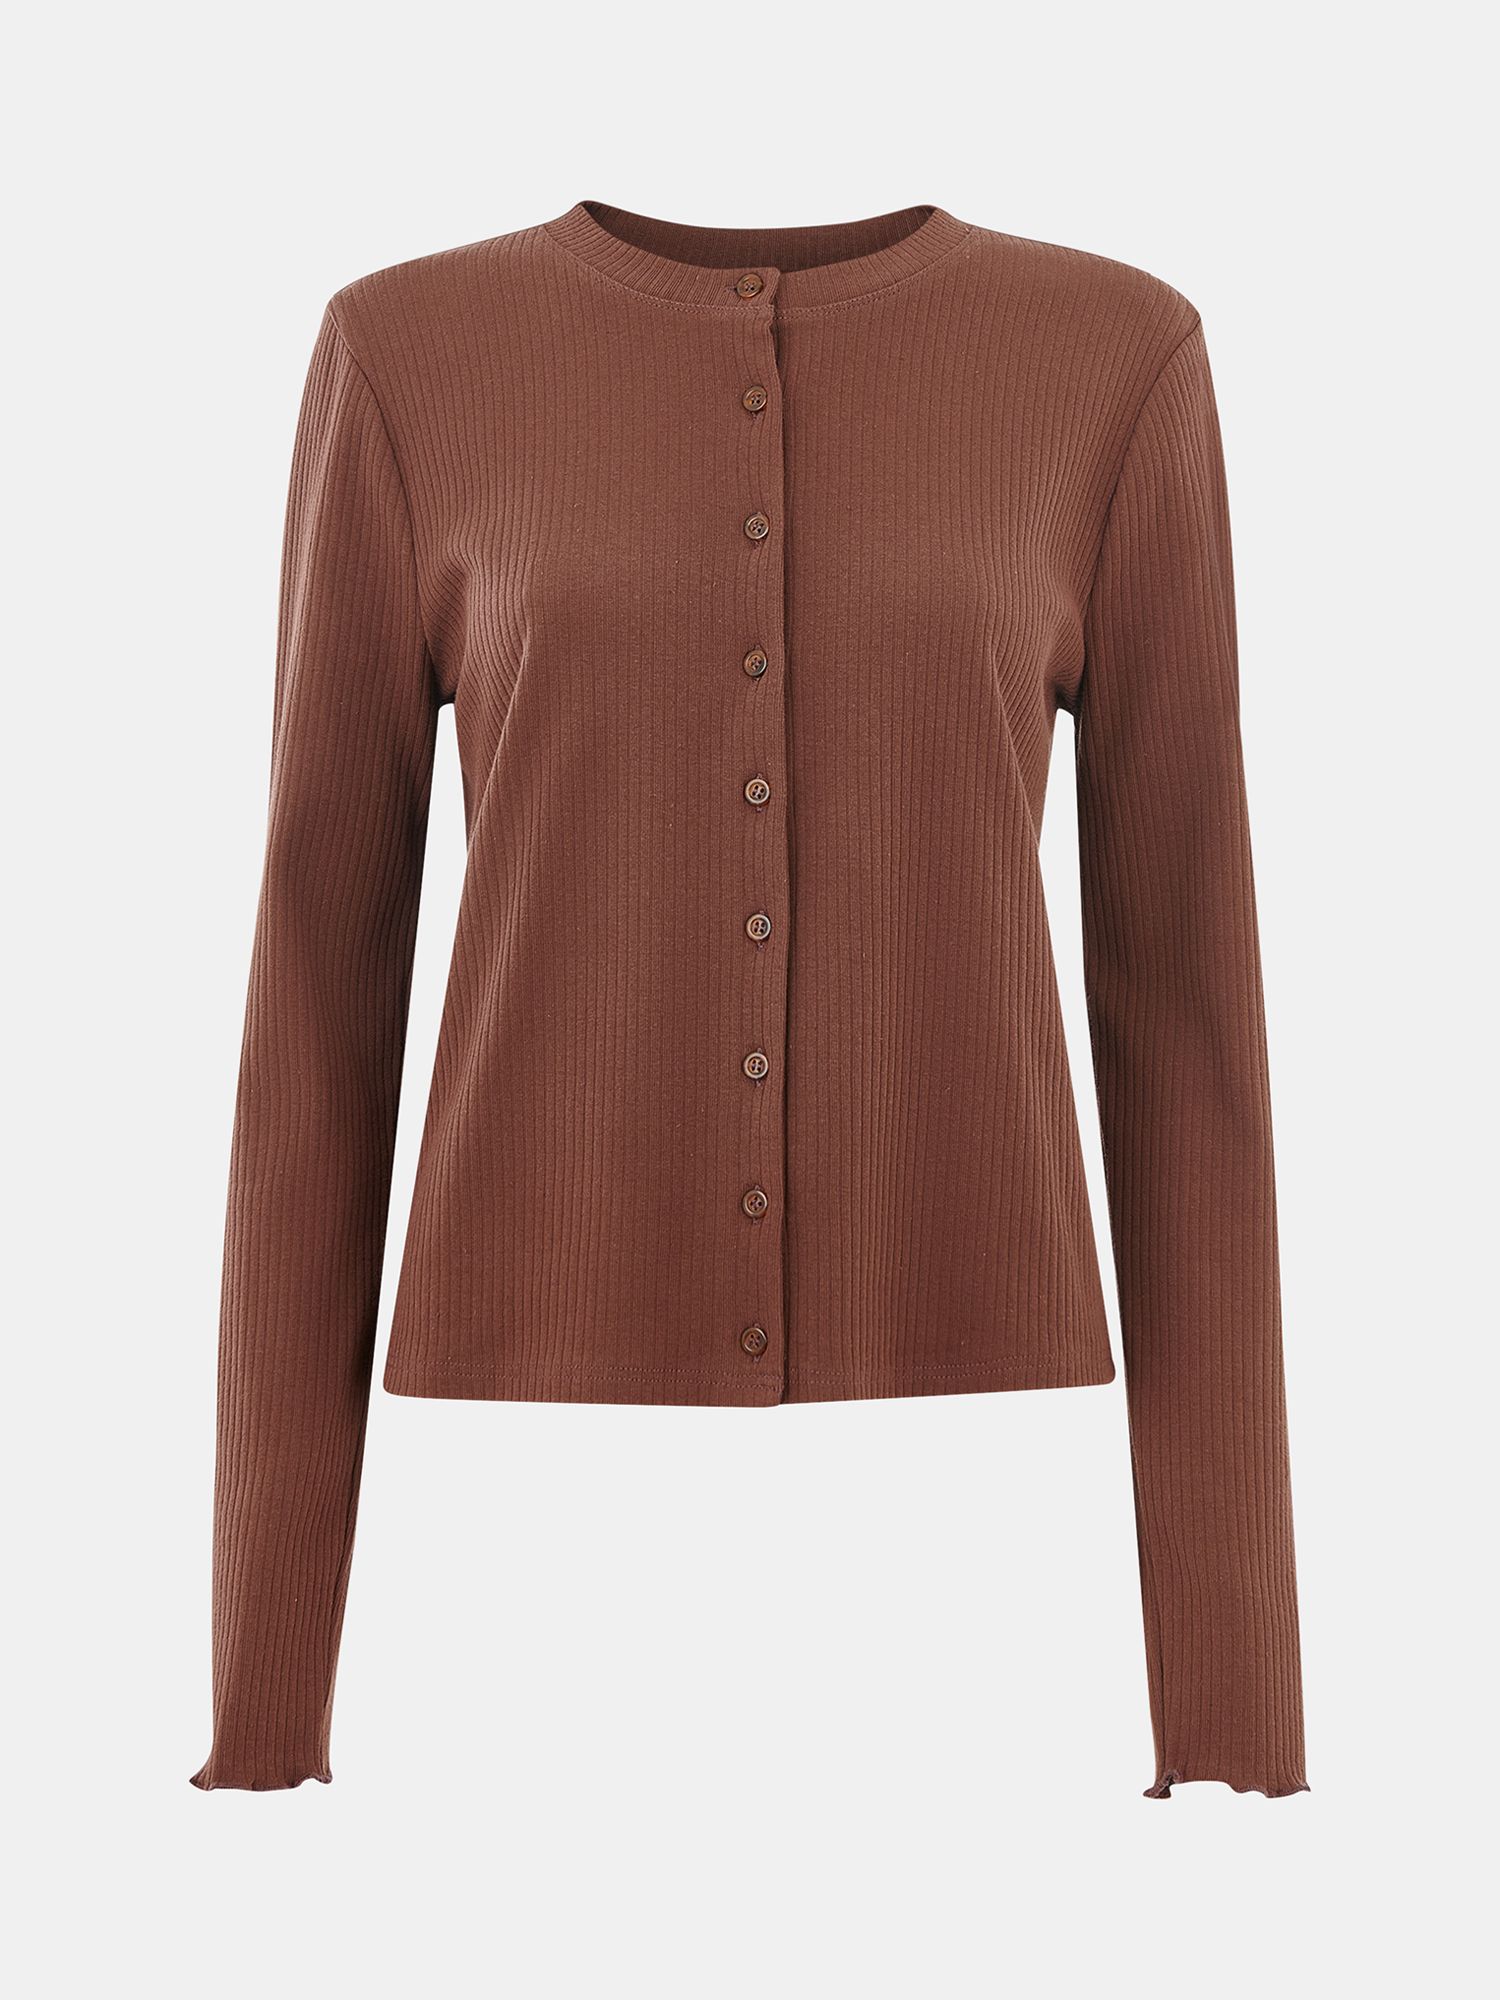 Buy Whistles Ribbed Jersey Button Front Top Online at johnlewis.com